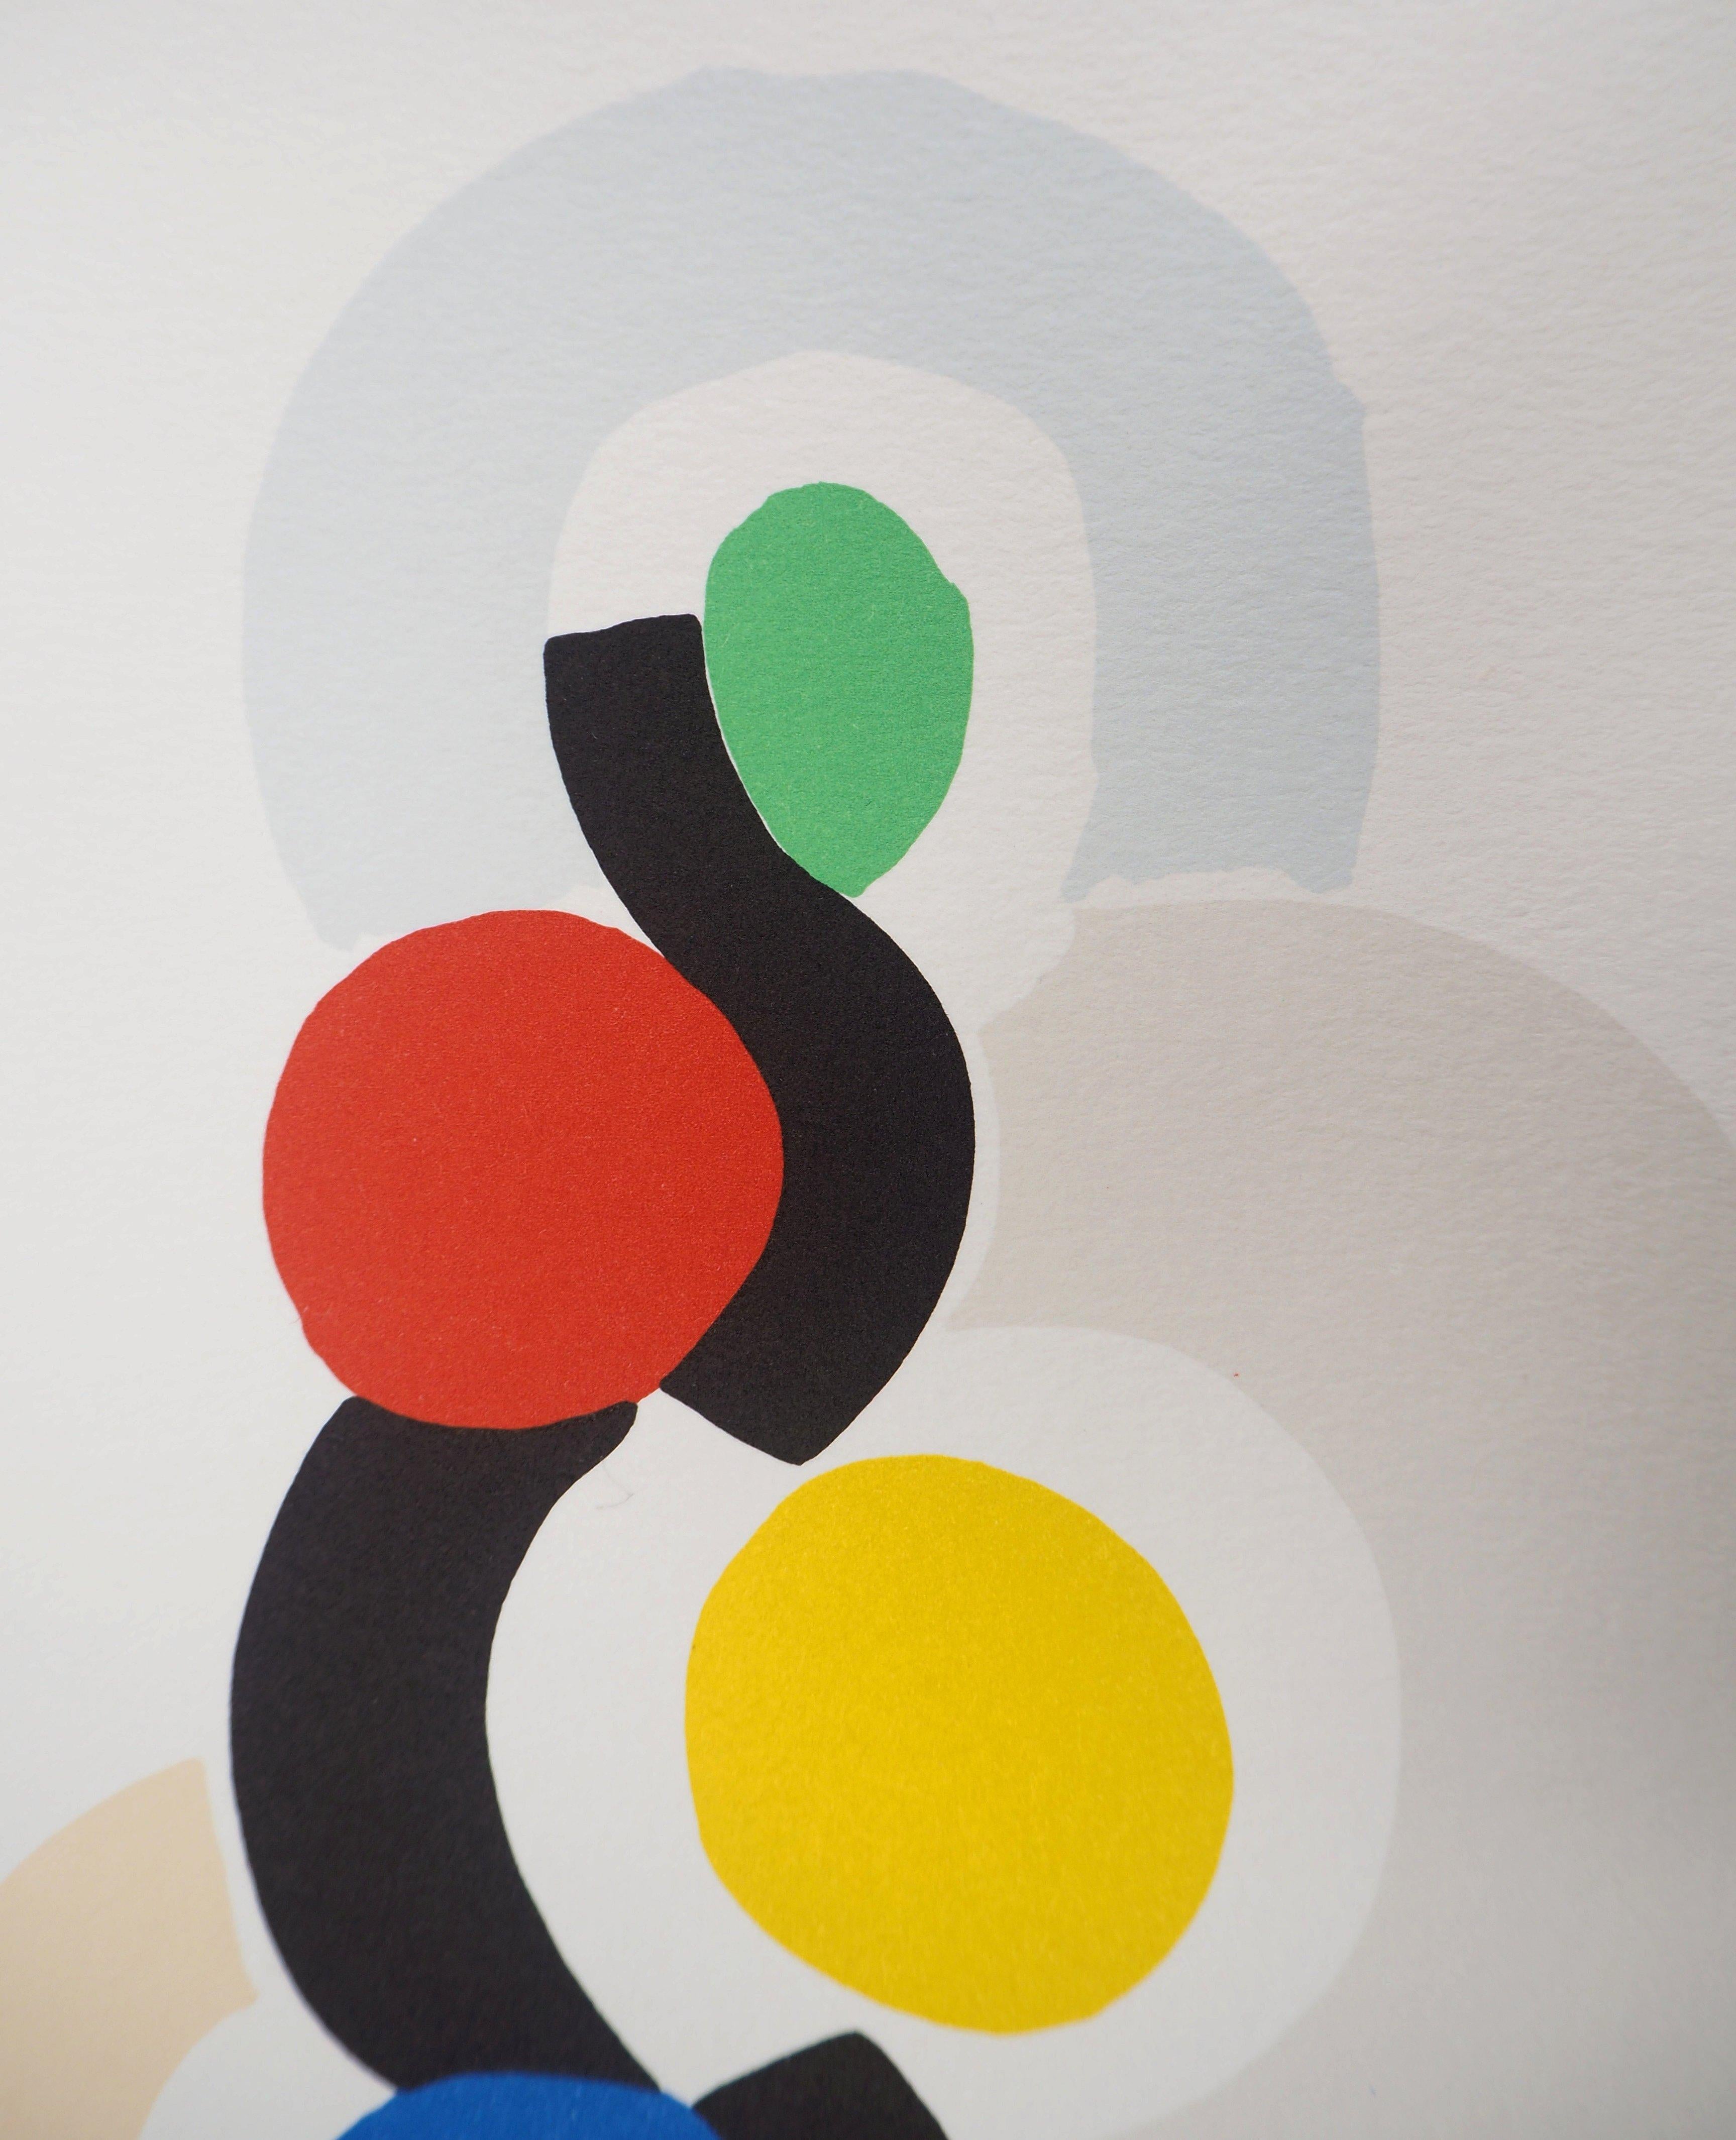 Rythm and Dance - Lithograph (Artcurial edition) - Gray Abstract Print by Sonia Delaunay